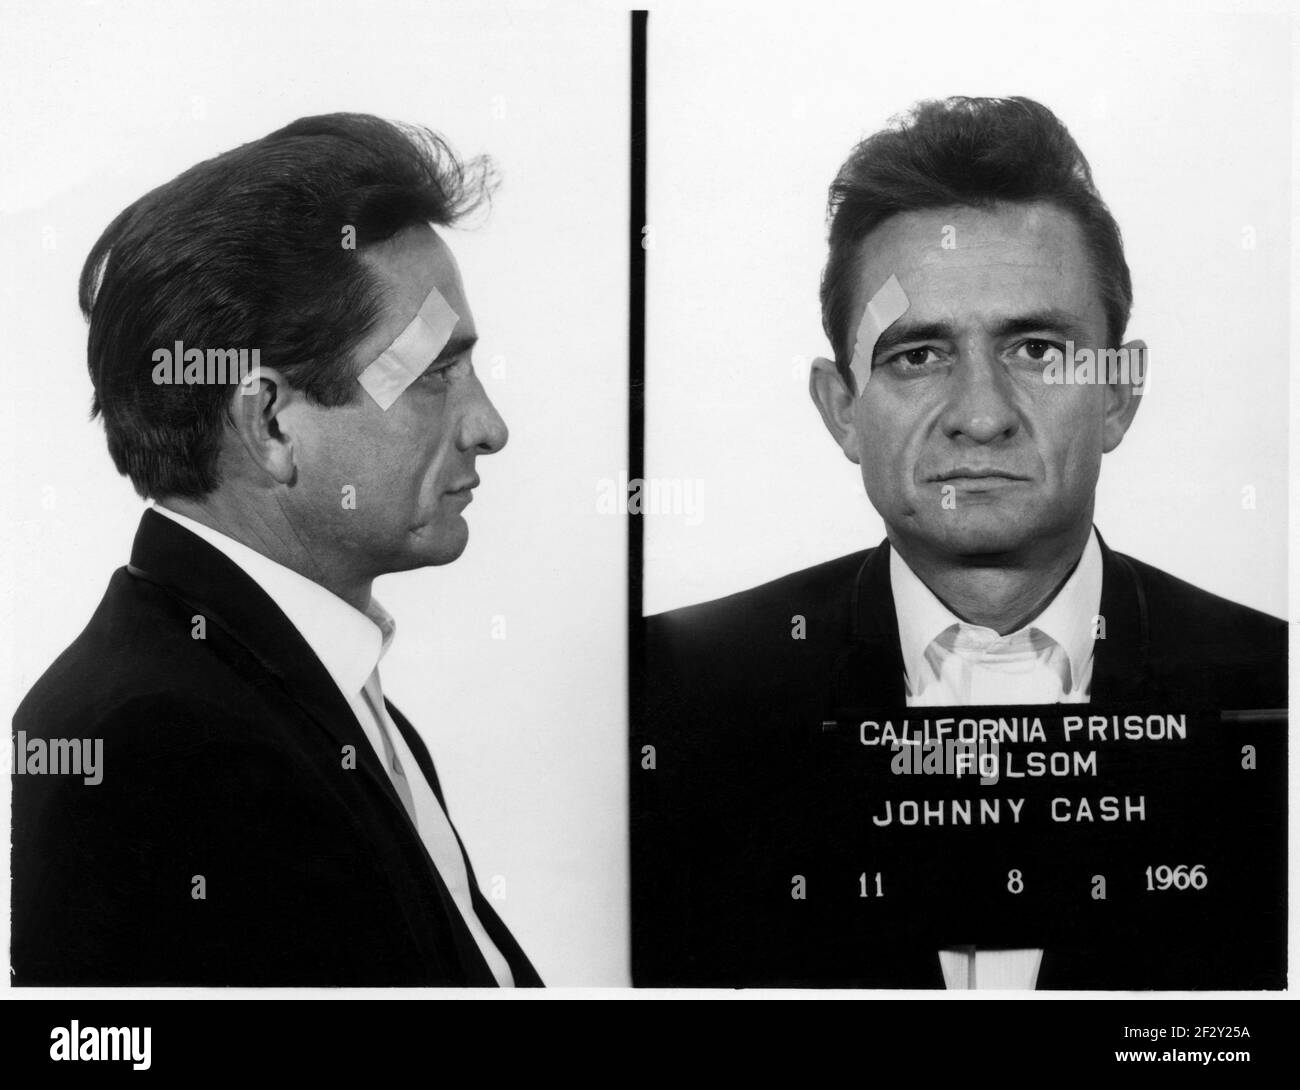 https://c8.alamy.com/comp/2F2Y25A/1966-8-november-usa-mugshot-of-rockn-roll-singer-and-composer-johnny-cash-1932-2003-taken-at-folsom-prison-california-the-first-time-he-performed-there-apparently-taken-as-a-joke-with-the-guards-foto-segnaletica-portrait-ritratto-cerotto-scherzo-fun-funny-archivio-gbb-2F2Y25A.jpg